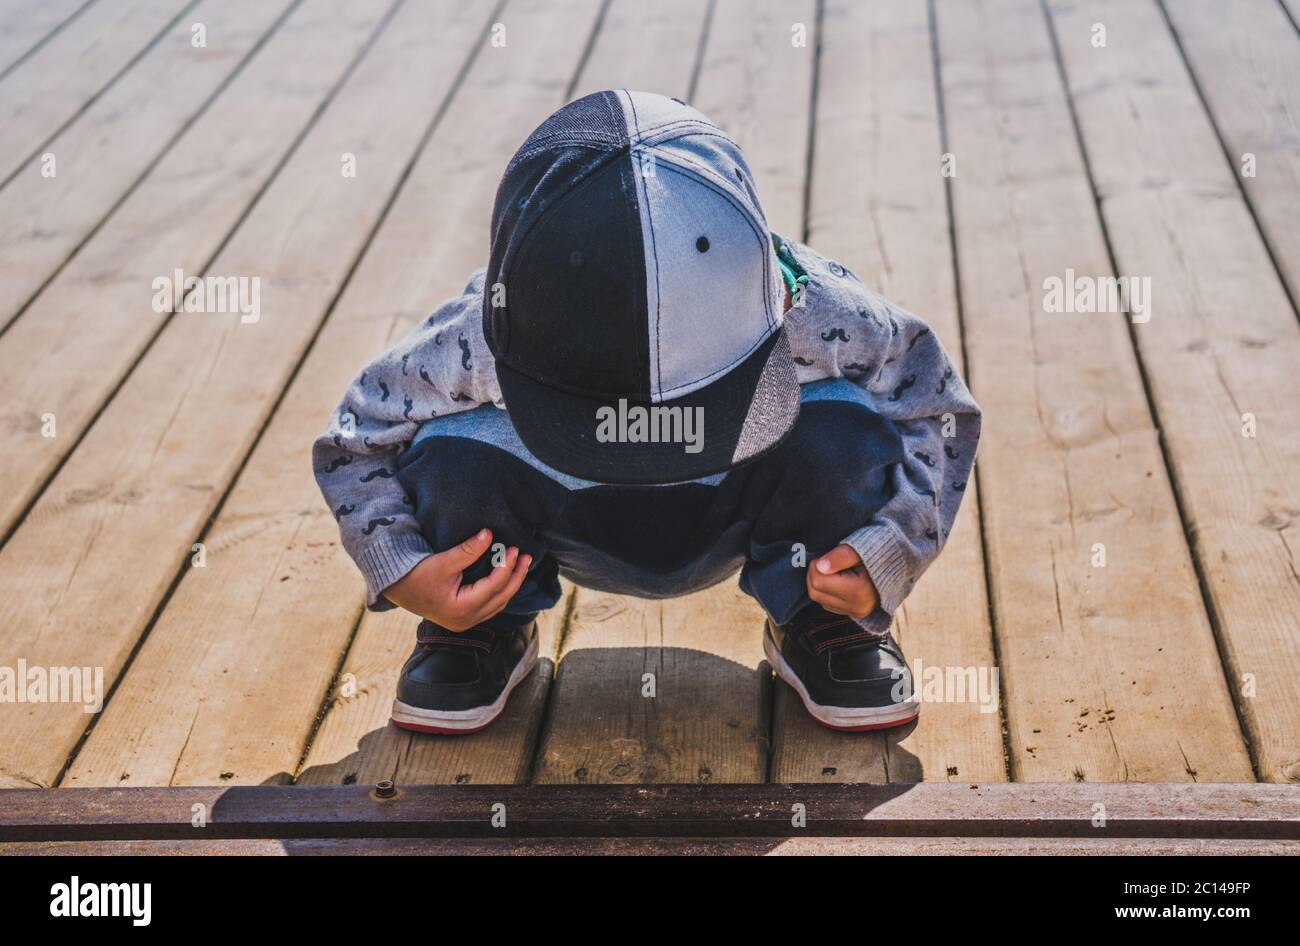 Small boy in baseball cap sitting in squatting position on wooden planked surface Stock Photo